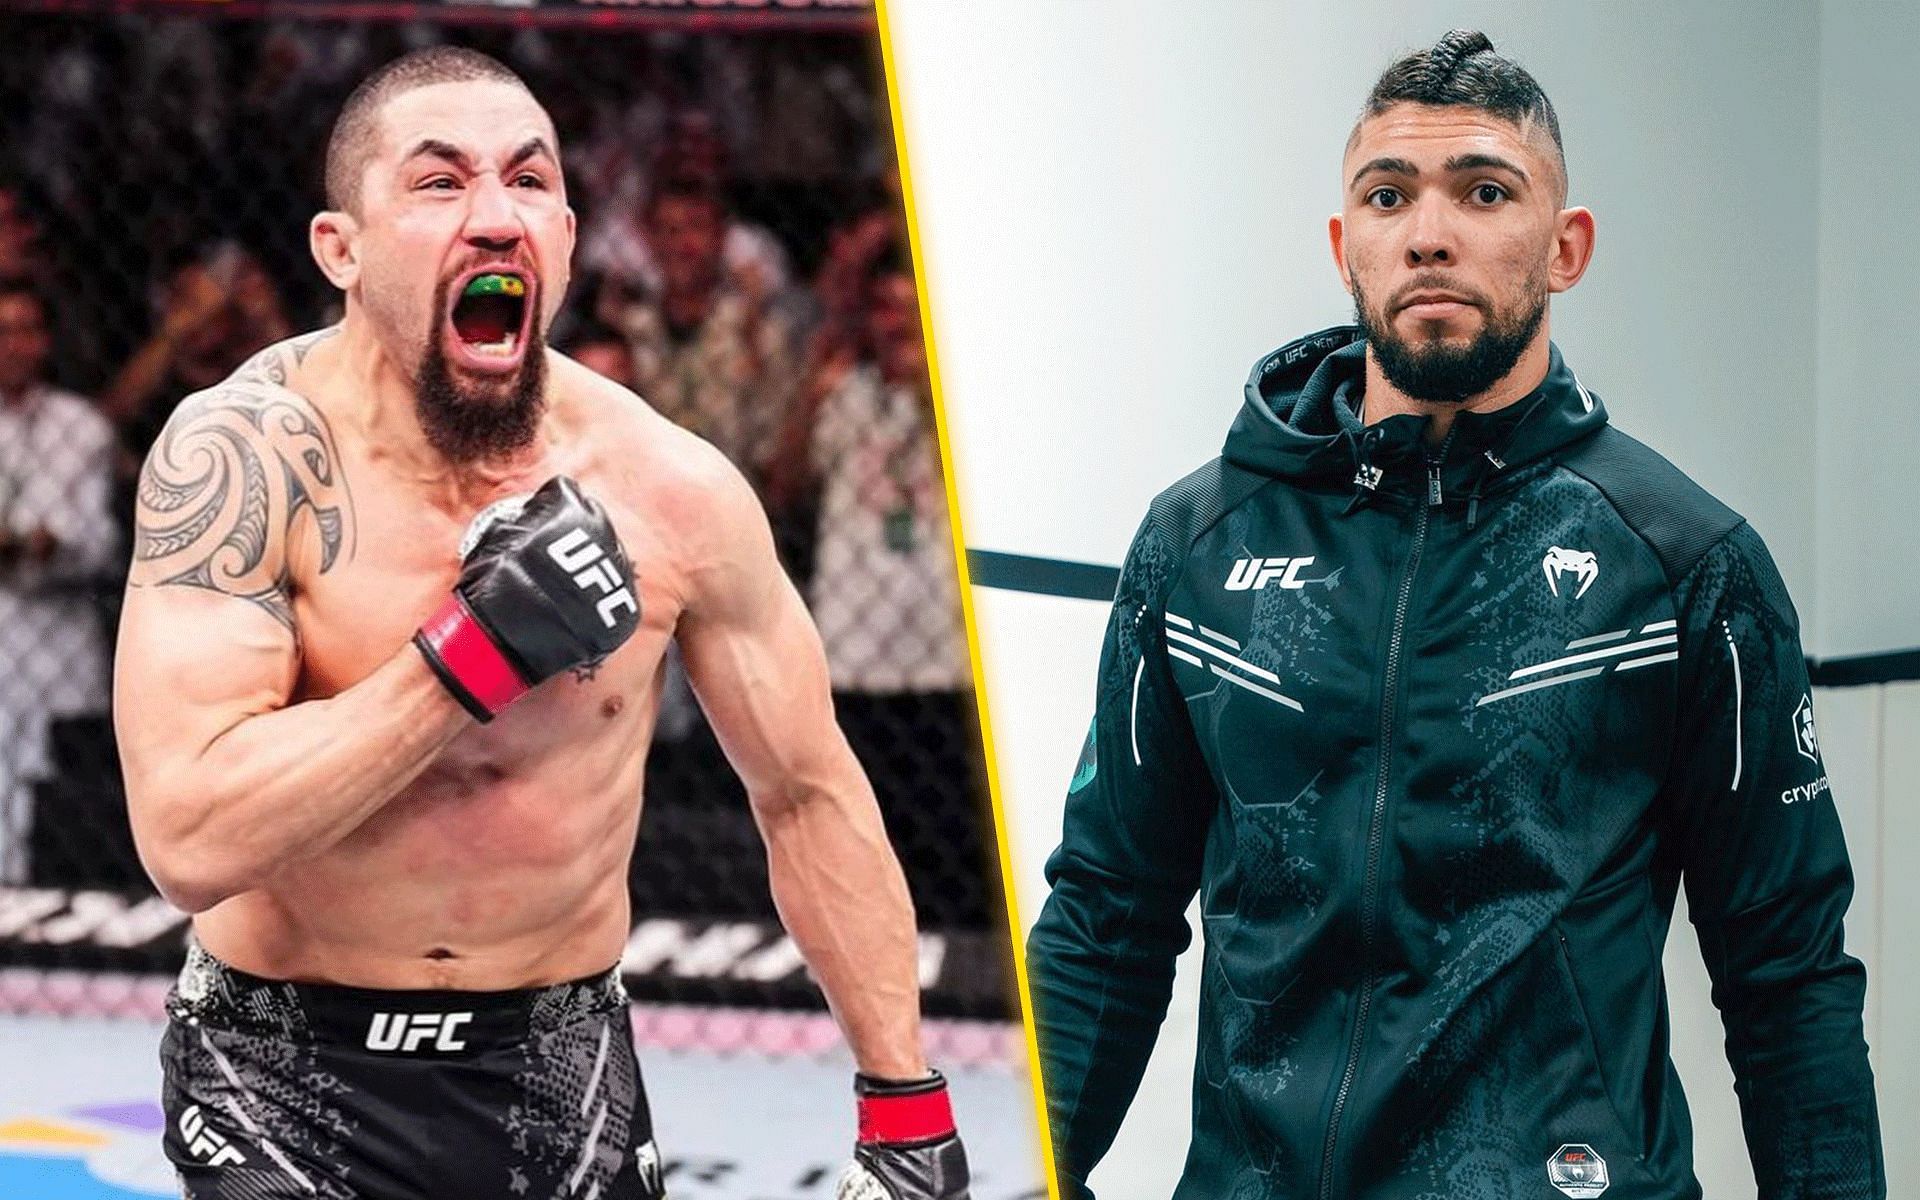 Robert Whittaker (left) and Johnny Walker (right) competed in marquee fights at UFC Saudi Arabia [Images courtesy: @robwhittakermma and @johnnywalker on Instagram]